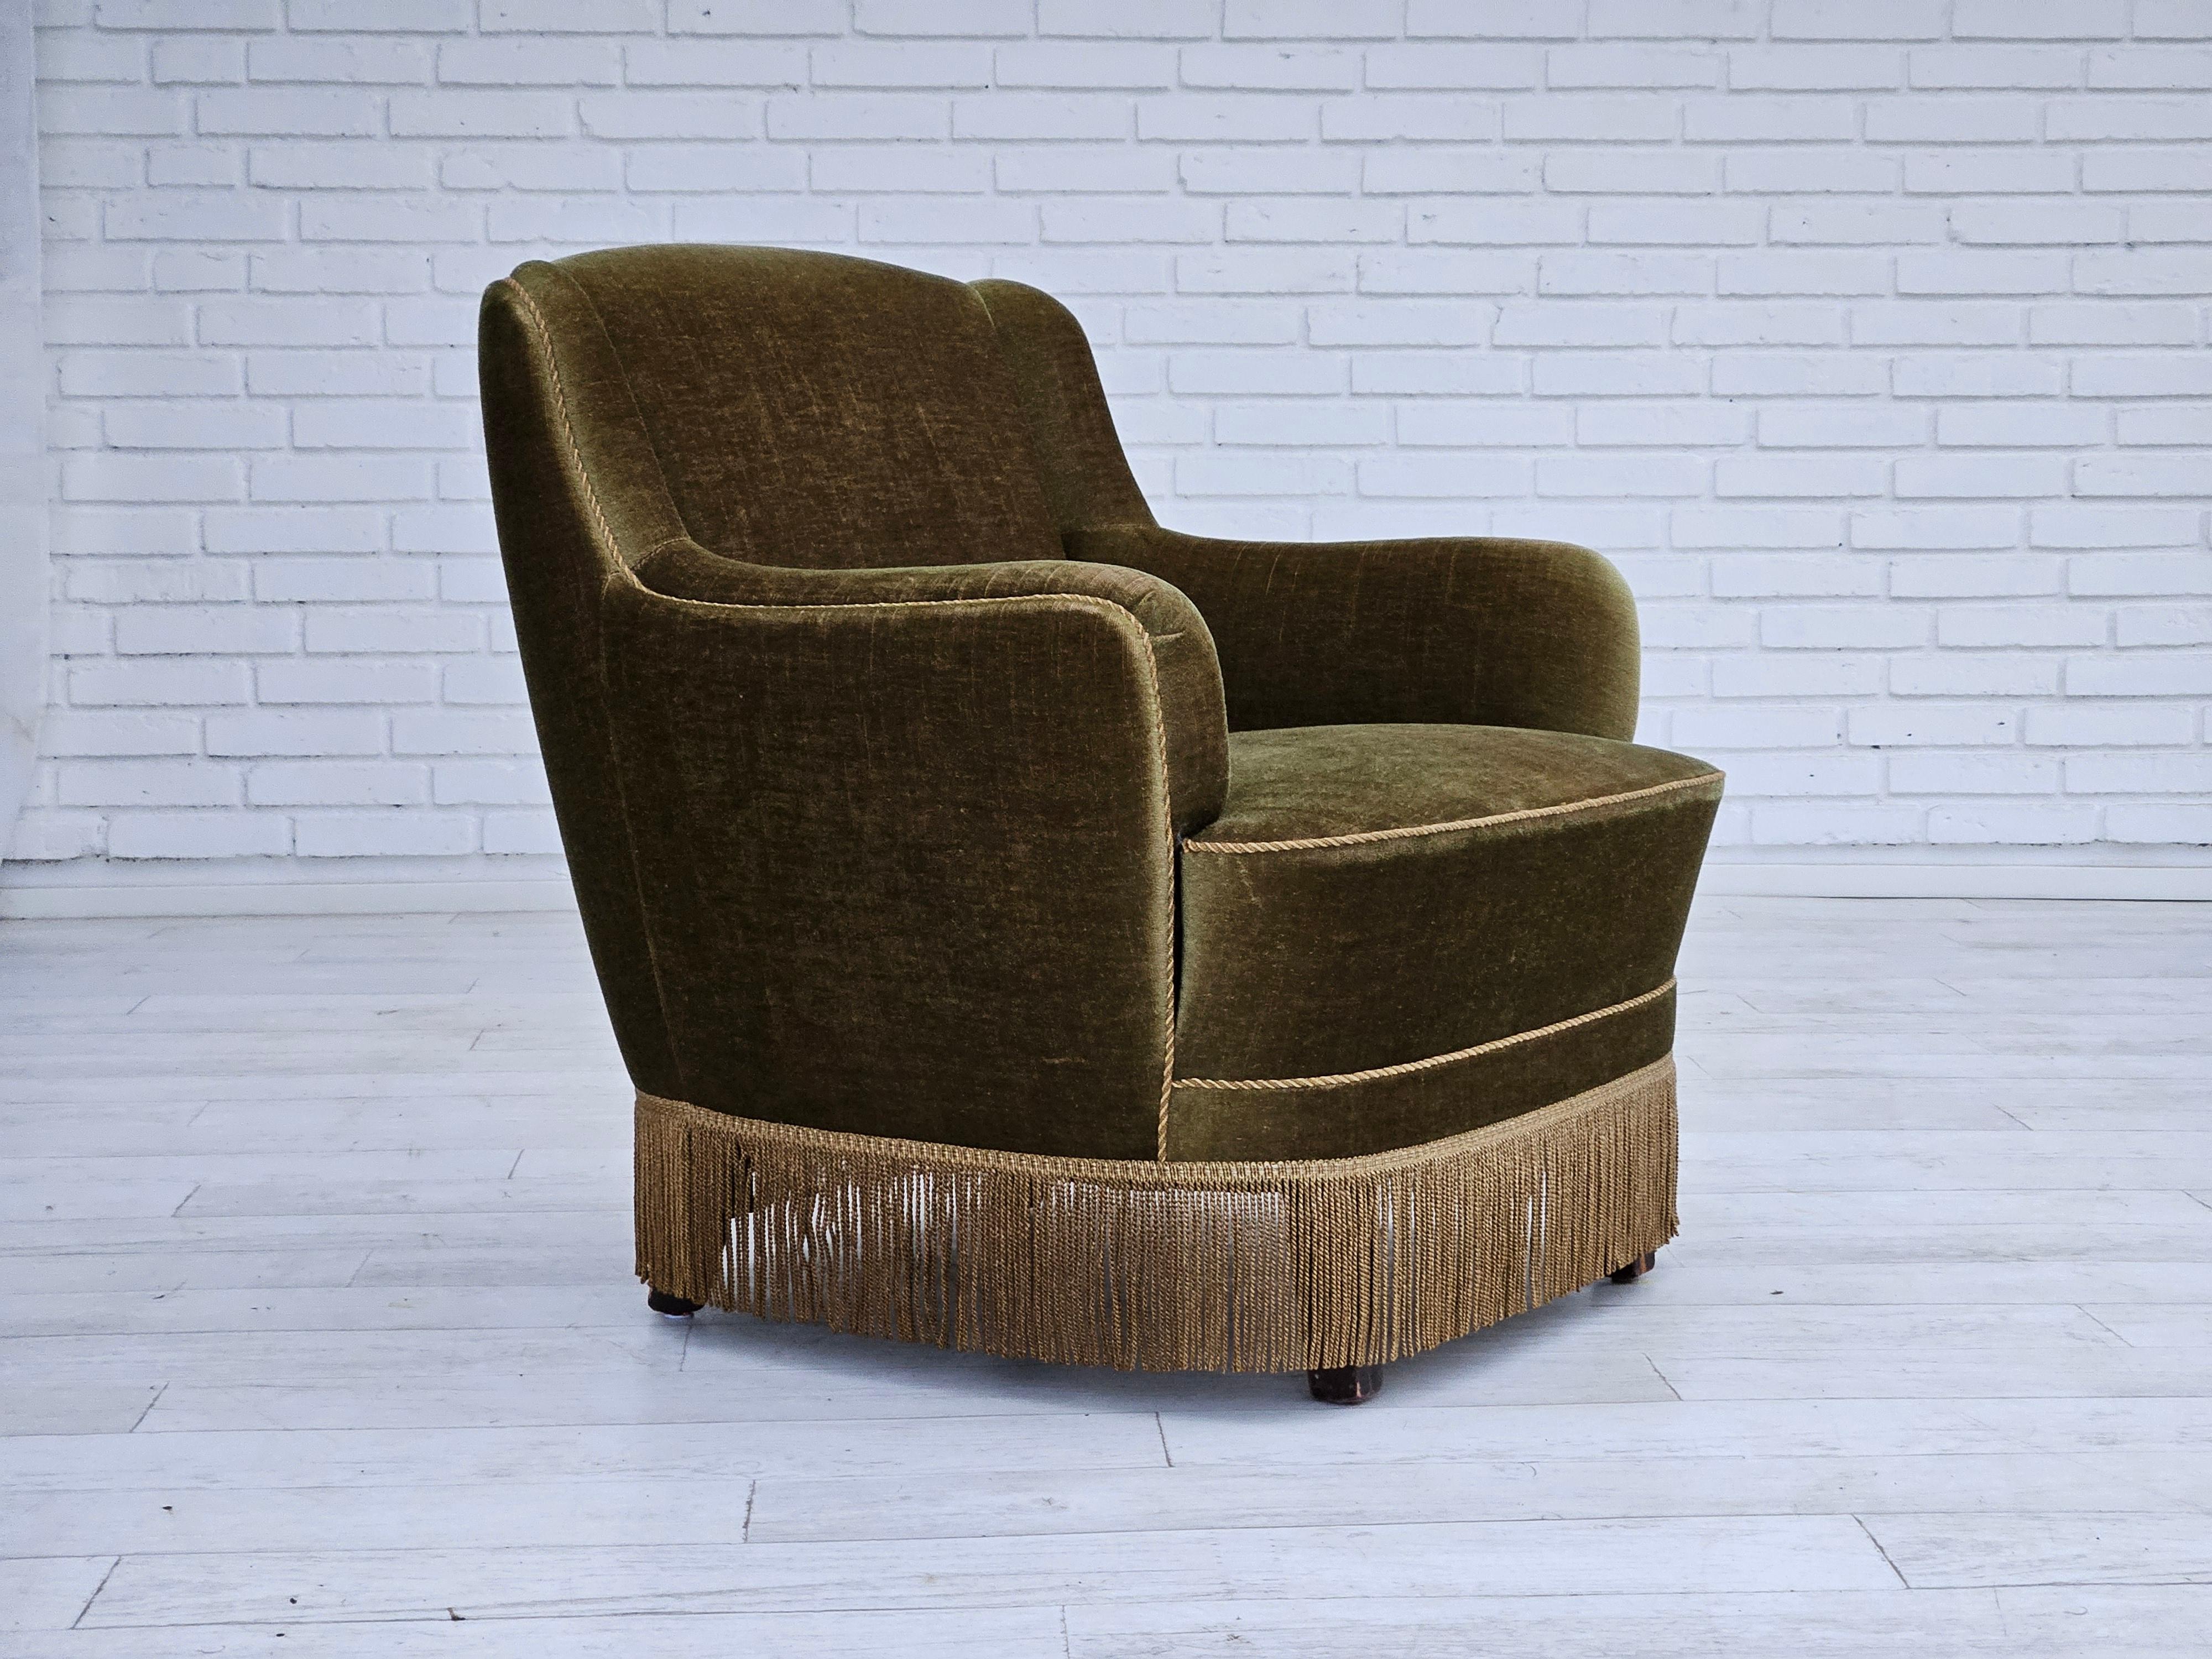 1970s, Danish lounge chair in original very good condition: no smells and no stains. Original olive green furniture velour. Beech wood legs, springs in the seat. Manufactured by Danish furniture manufacturer in about 1970s.